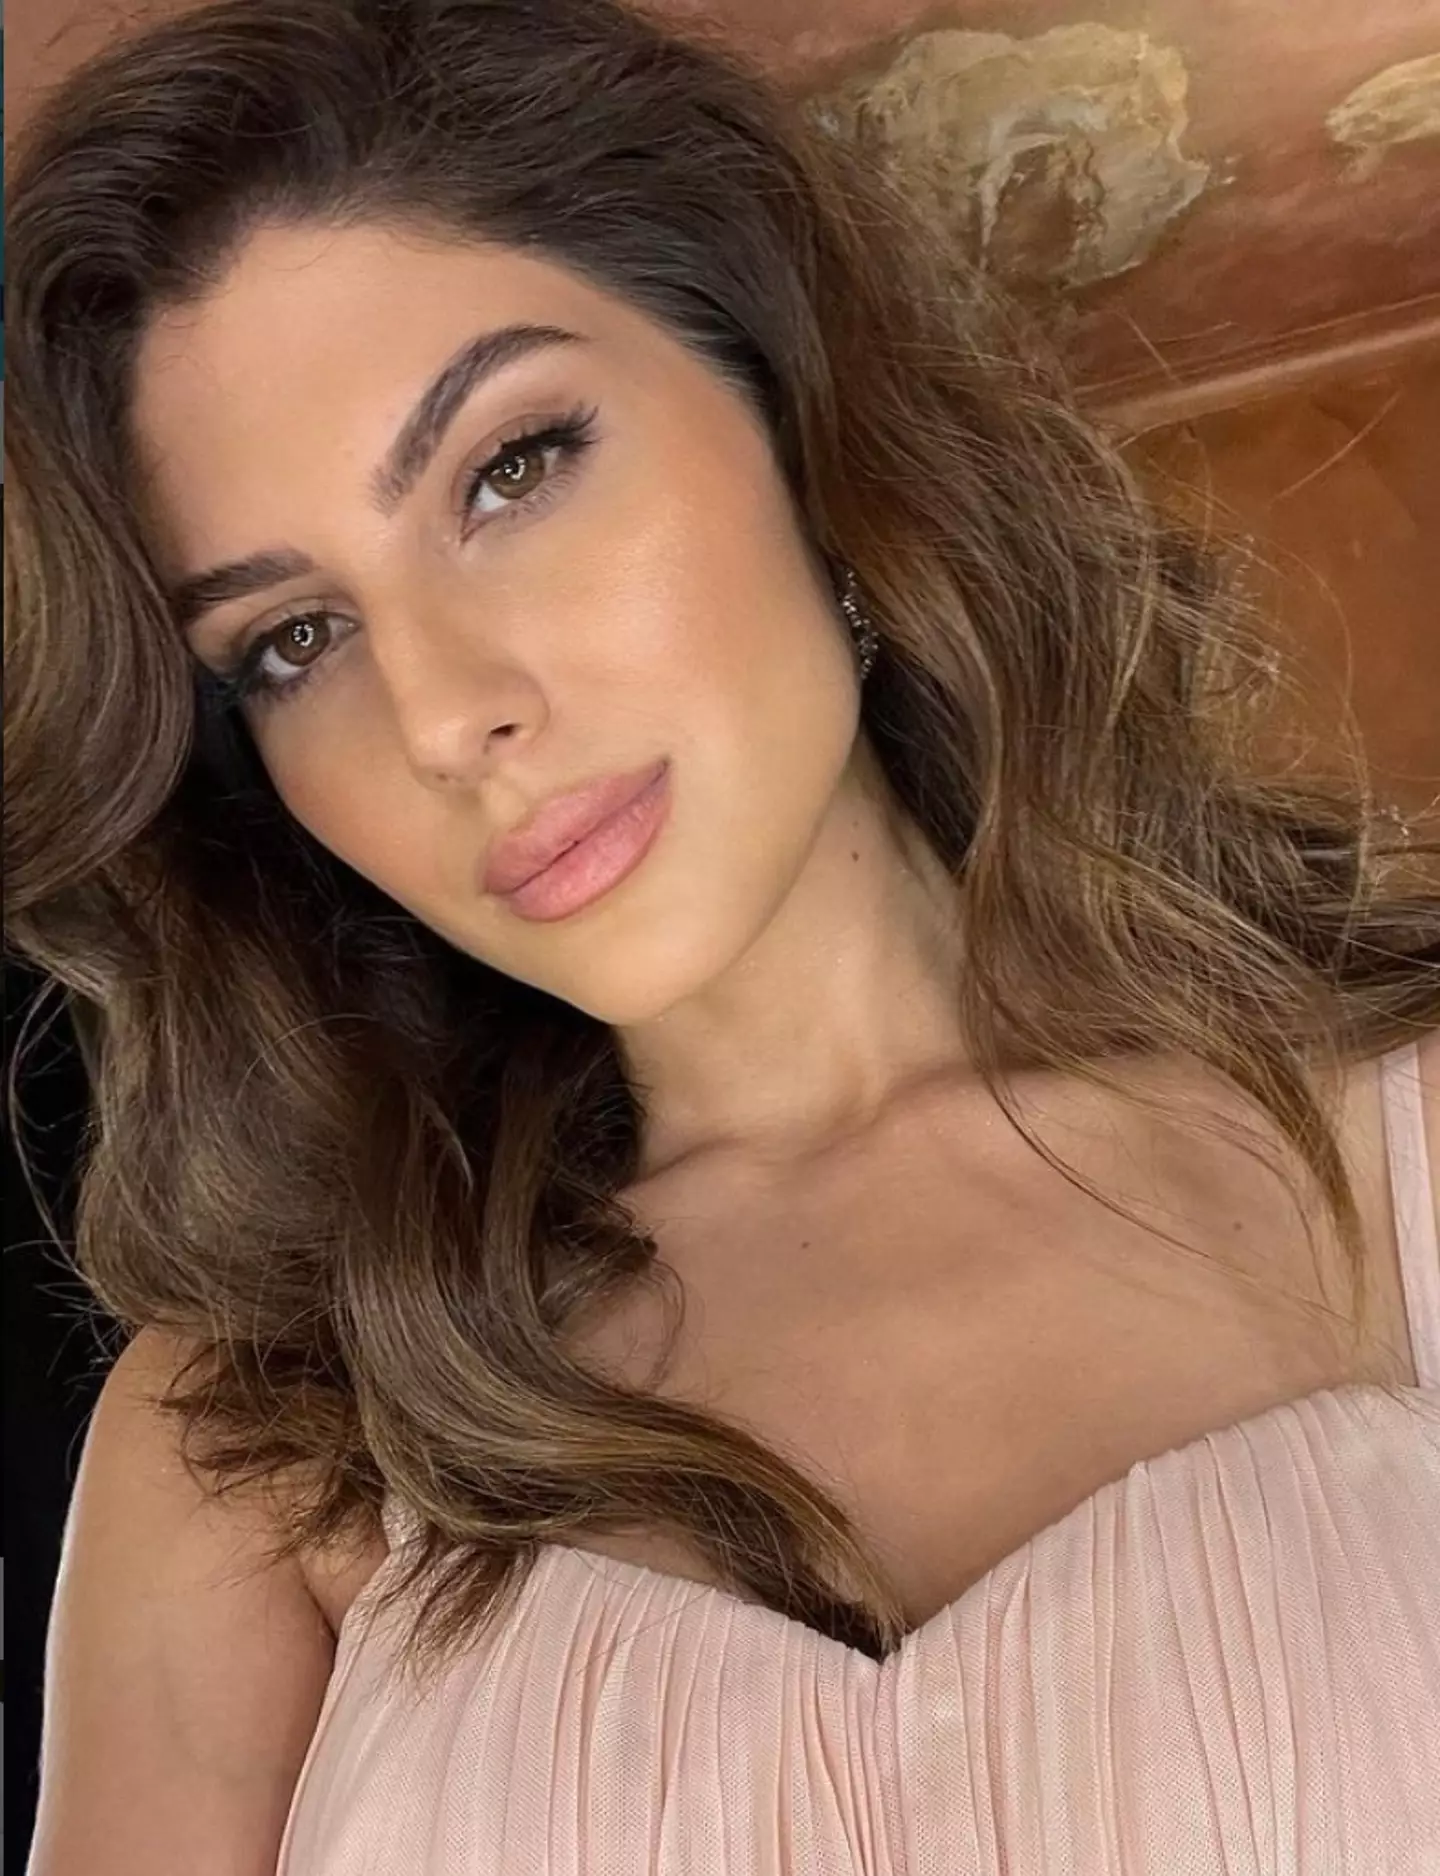 Elnaaz Norouzi took to Instagram on Monday in support of the movement.